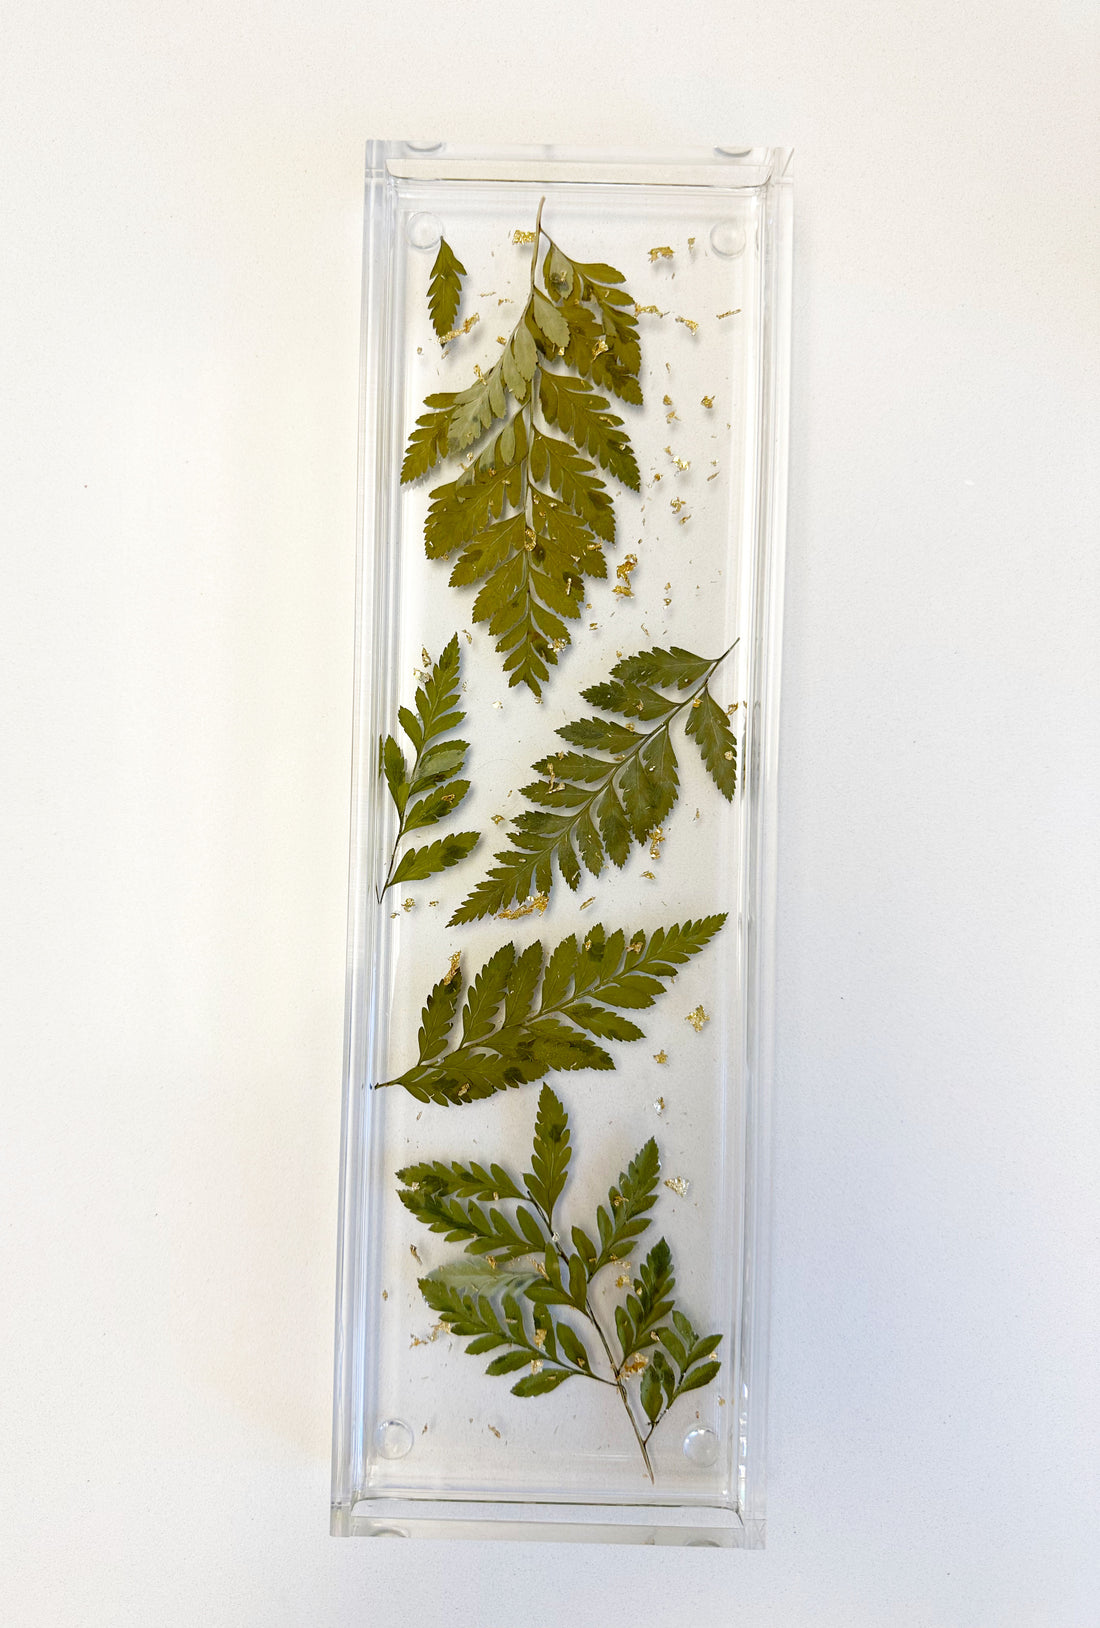 Resin Display tray with pressed ferns with gold flakes